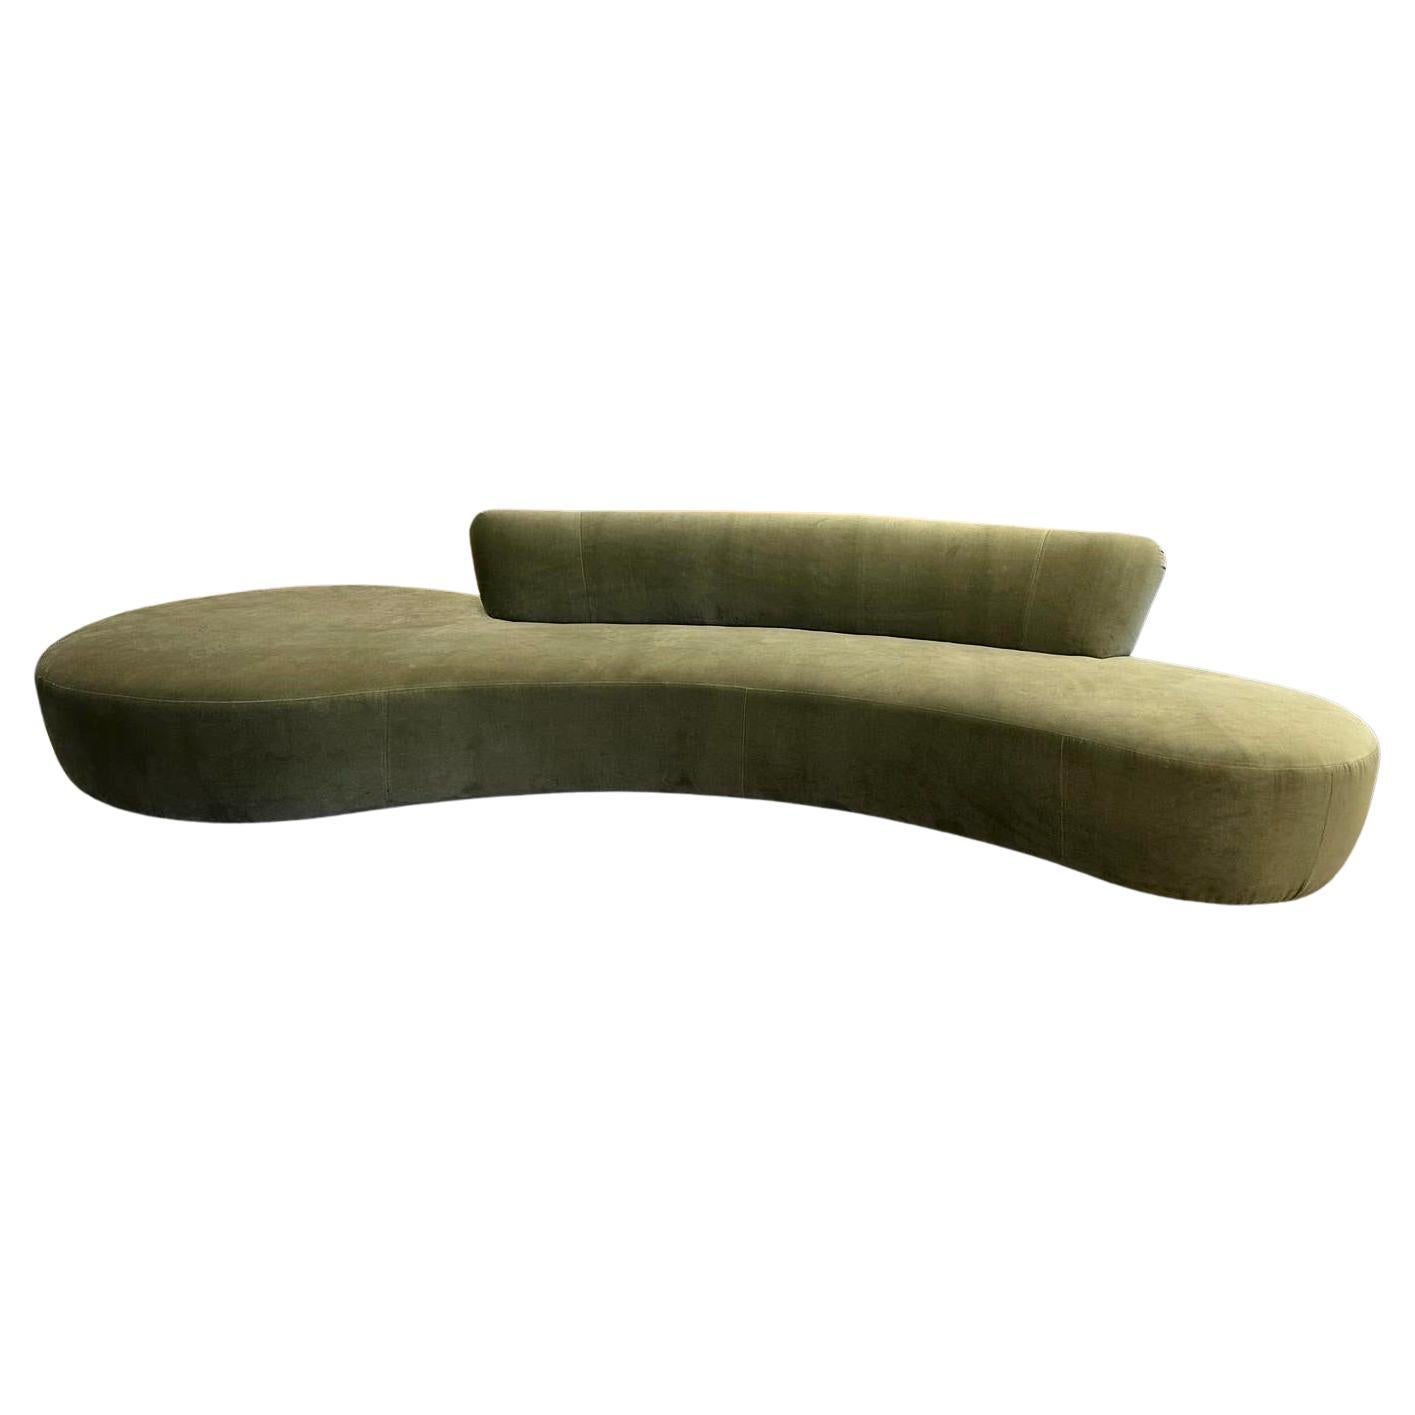 Extra Long Serpentine Style Sofa in Sage Green Velvet